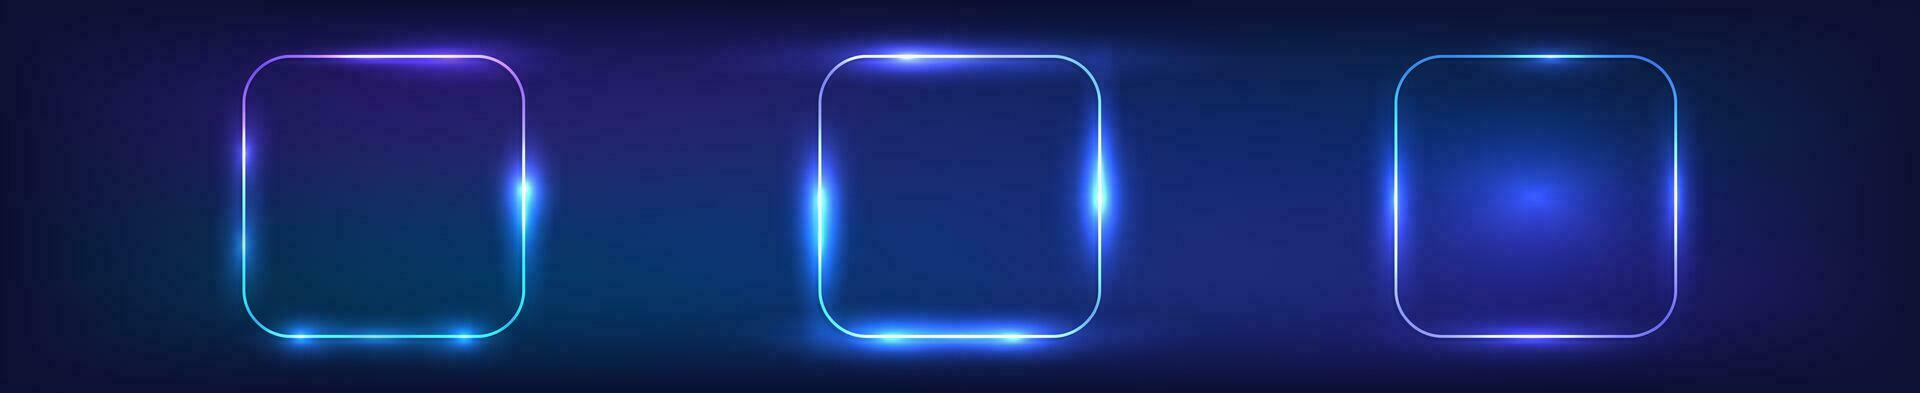 Neon rounded square frame with shining effects vector